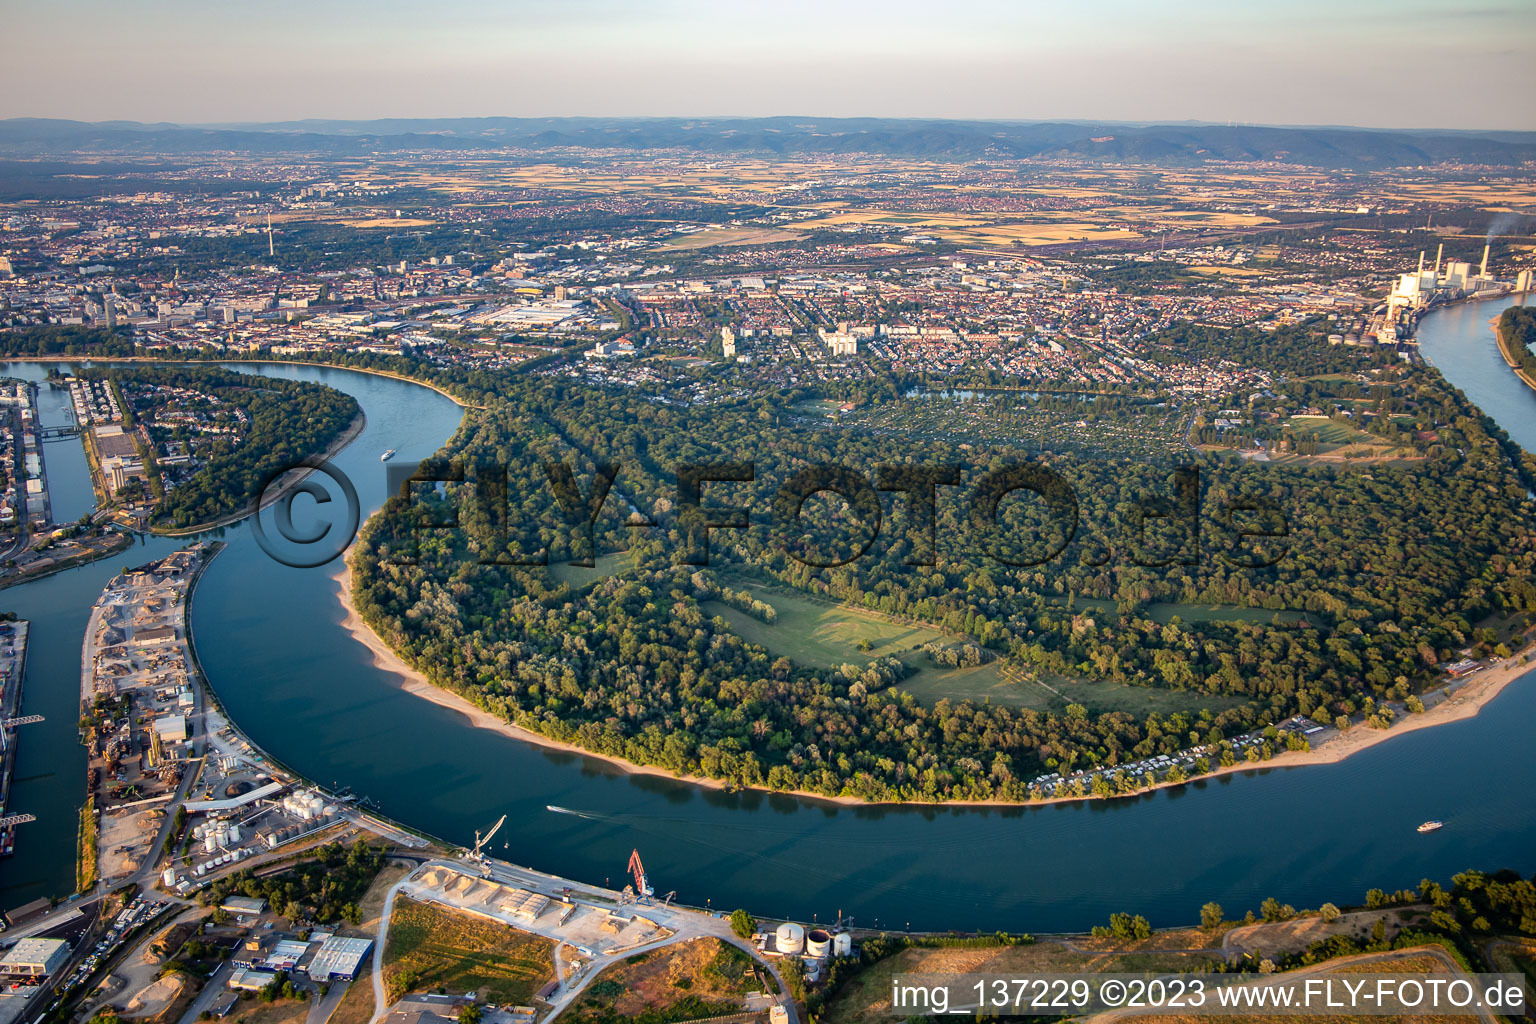 Reissinsel and forest park, nature reserve in the Rhine loop from the south in the district Niederfeld in Mannheim in the state Baden-Wuerttemberg, Germany